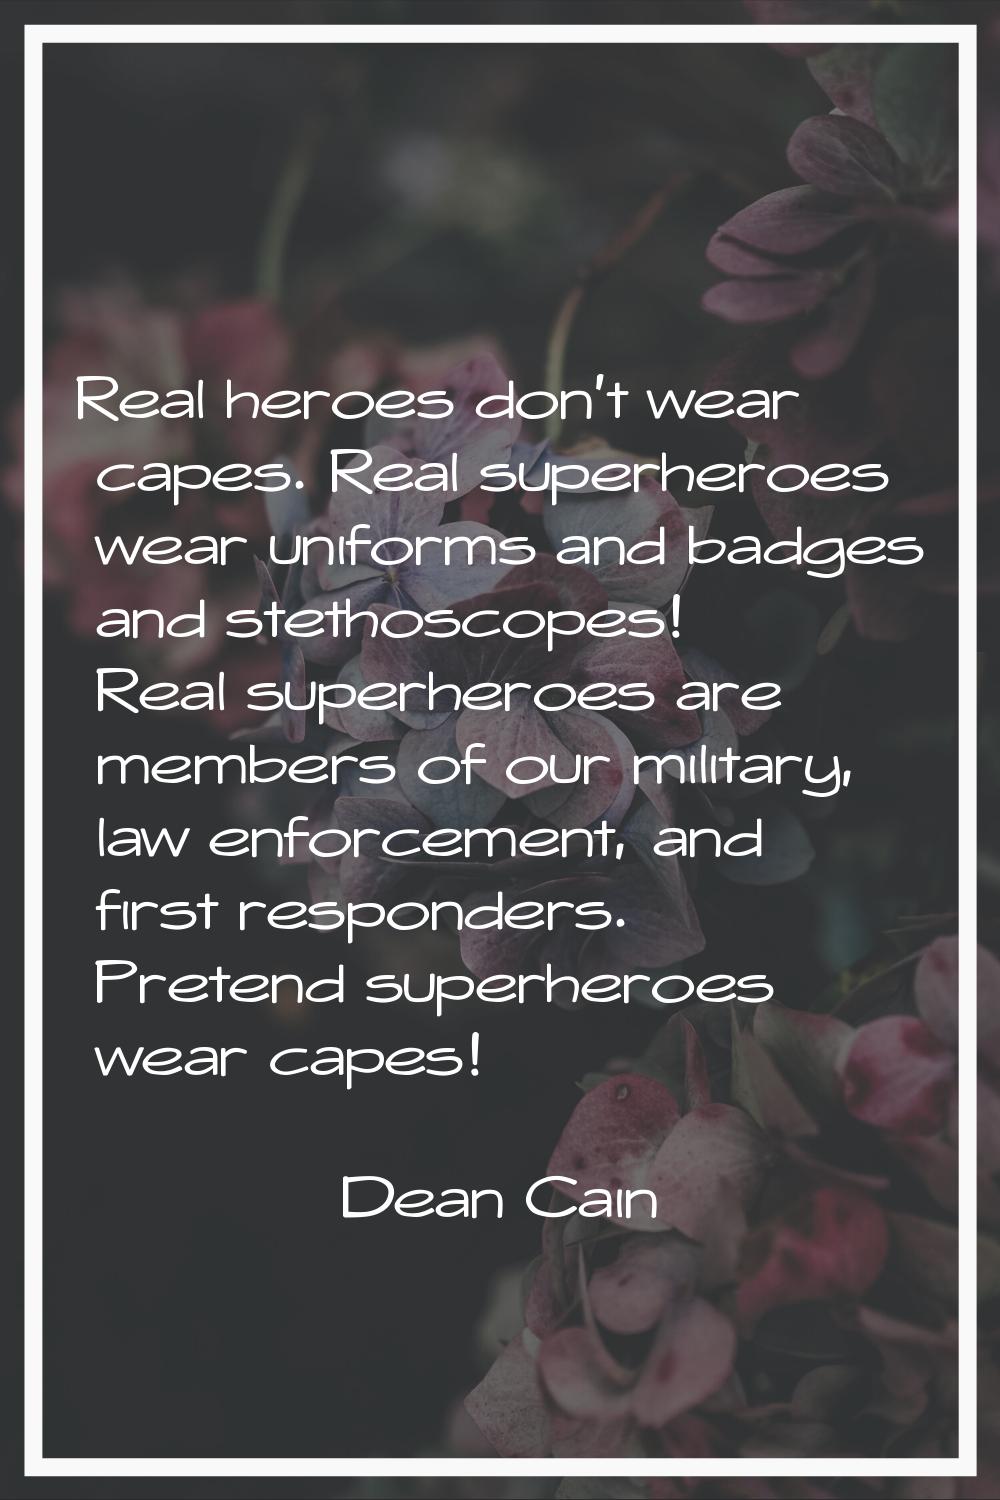 Real heroes don't wear capes. Real superheroes wear uniforms and badges and stethoscopes! Real supe